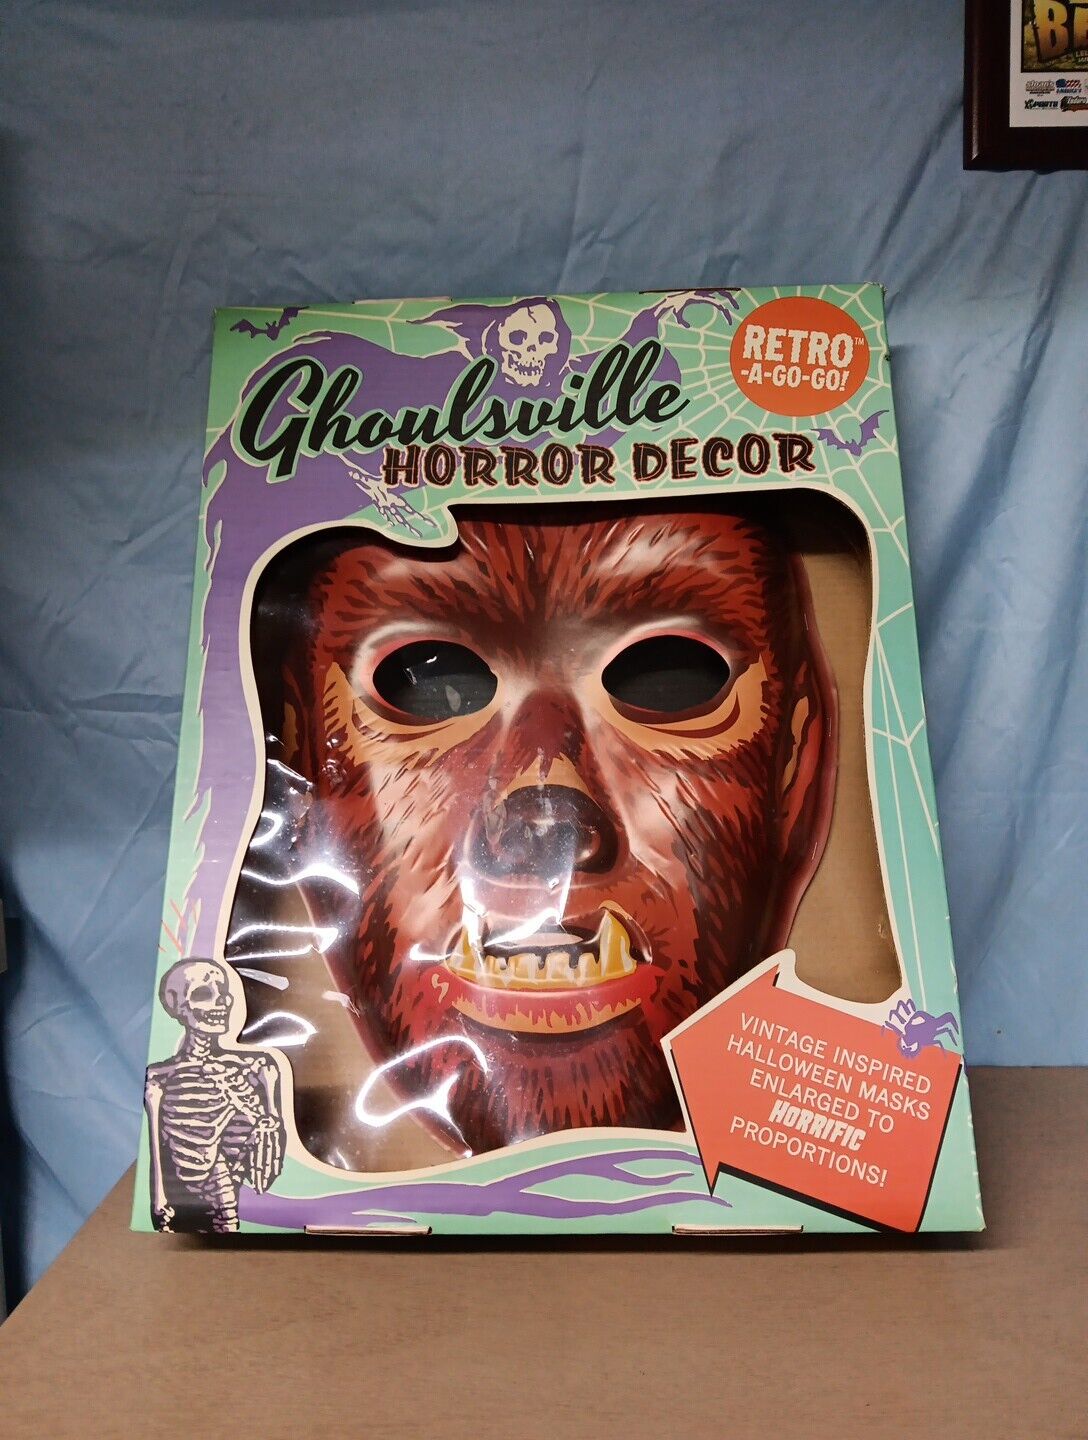 Ghoulsville Horror Decor Retro A-Go-Go Giant Vacuform 3D Mask BLOODY WEREWOLF